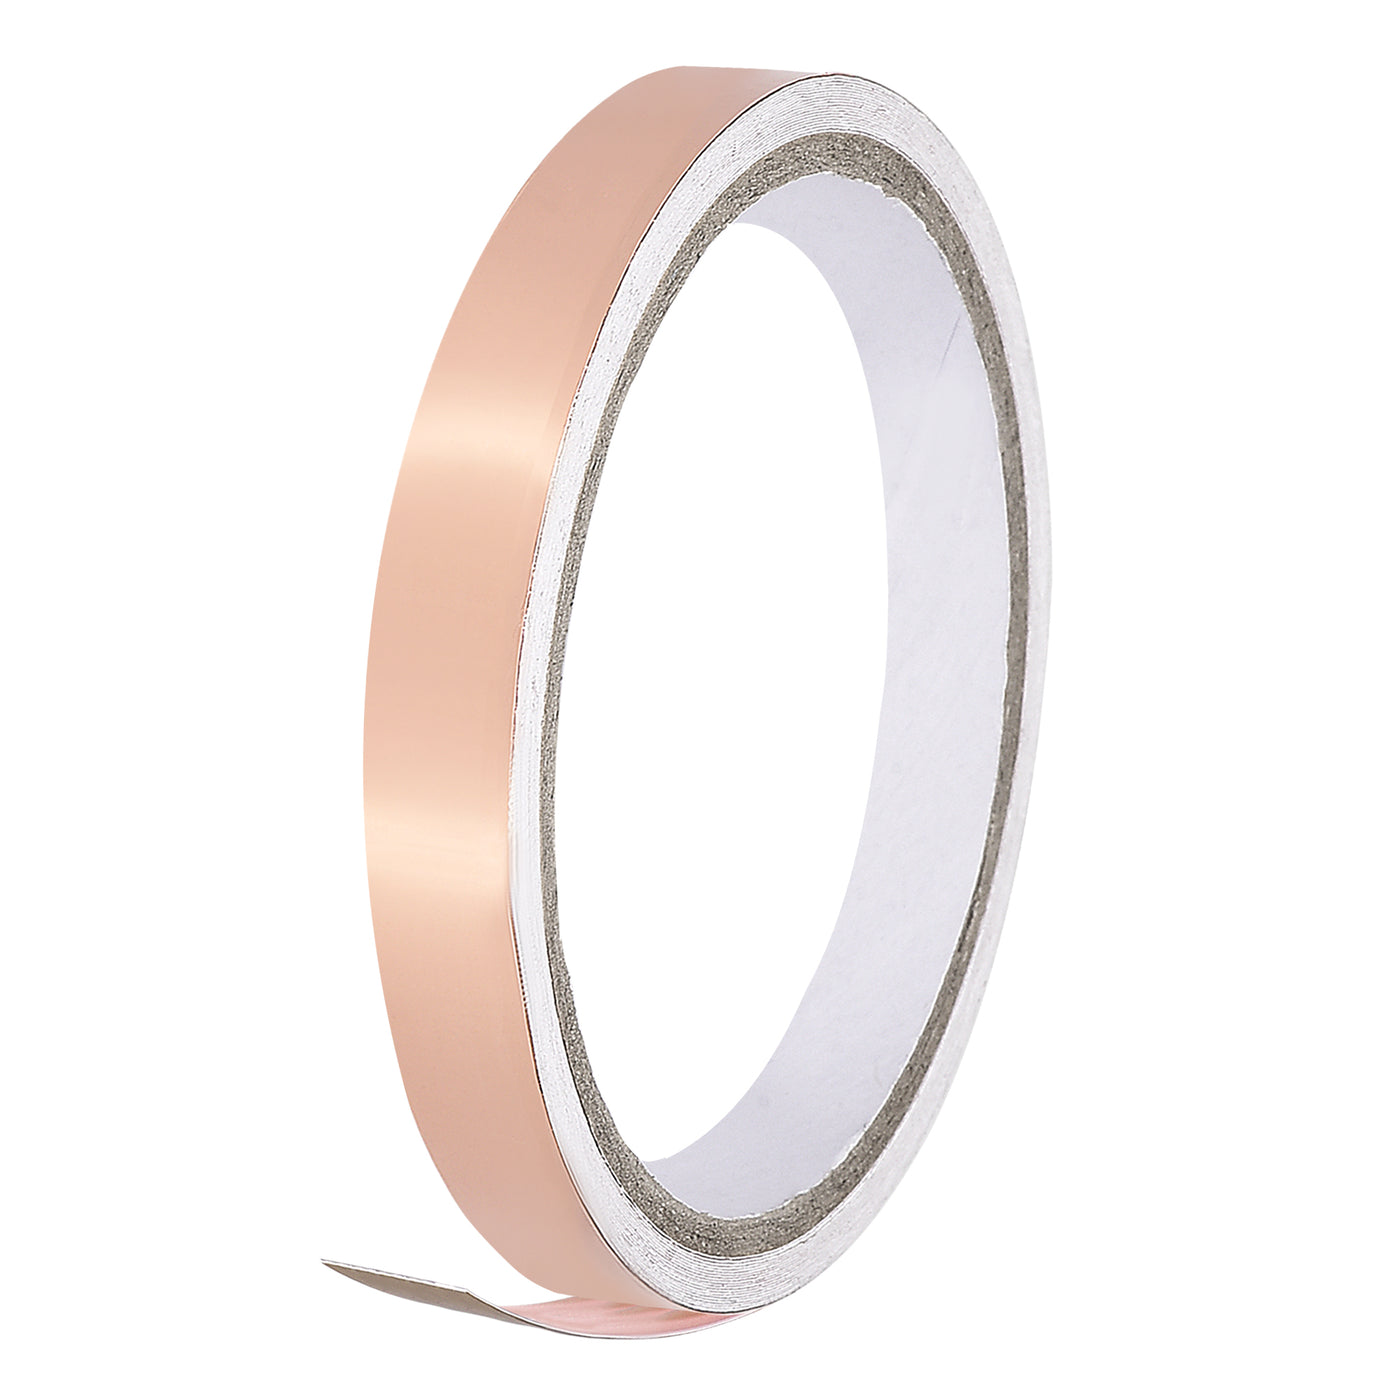 uxcell Uxcell Single-Sided Conductive Tape Copper Foil Tape 15mm x 5m/16.4ft for EMI Shielding 4pcs